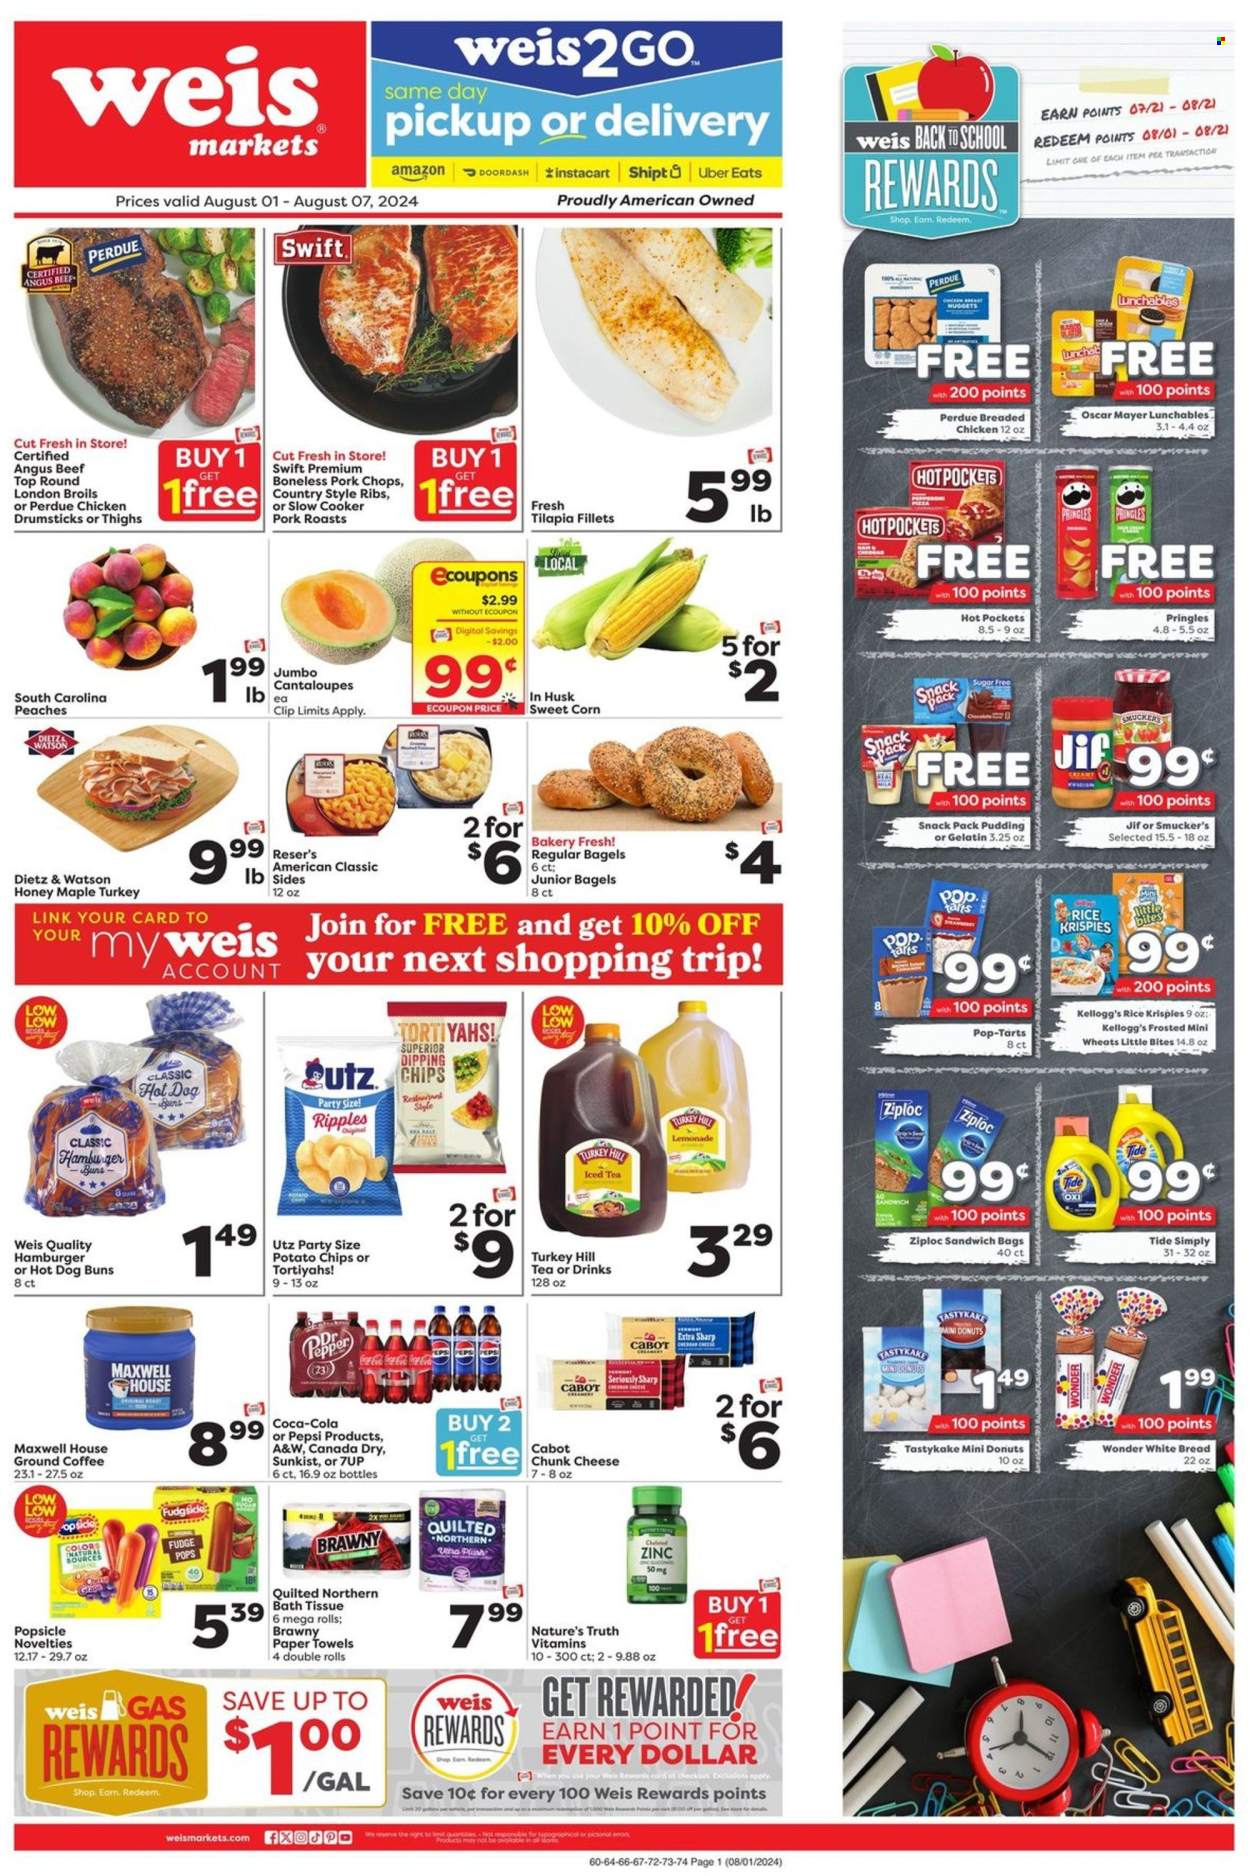 thumbnail - Weis Flyer - 08/01/2024 - 08/07/2024 - Sales products - bagels, bread, white bread, hot dog rolls, muffin, buns, burger buns, cantaloupe, corn, sweet corn, melons, peaches, chicken thighs, chicken drumsticks, Perdue®, ribs, pork chops, pork meat, pork ribs, country style ribs, fish fillets, tilapia, hot pocket, snack, nuggets, Lunchables, breaded chicken, Oscar Mayer, Dietz & Watson, chunk cheese, pudding, snack bar, milk, ice cream, ice cream bars, popsicle, fudge, Kellogg's, Pop-Tarts, Little Bites, potato chips, Pringles, chips, Rice Krispies, honey, Jif, Canada Dry, Coca-Cola, ginger ale, lemonade, Pepsi, ice tea, soft drink, 7UP, A&W, carbonated soft drink, Maxwell House, coffee, ground coffee, bath tissue, Quilted Northern, kitchen towels, paper towels, Tide, Ziploc, Nature's Truth, gelatin, zinc, dietary supplement, vitamins. Page 1.